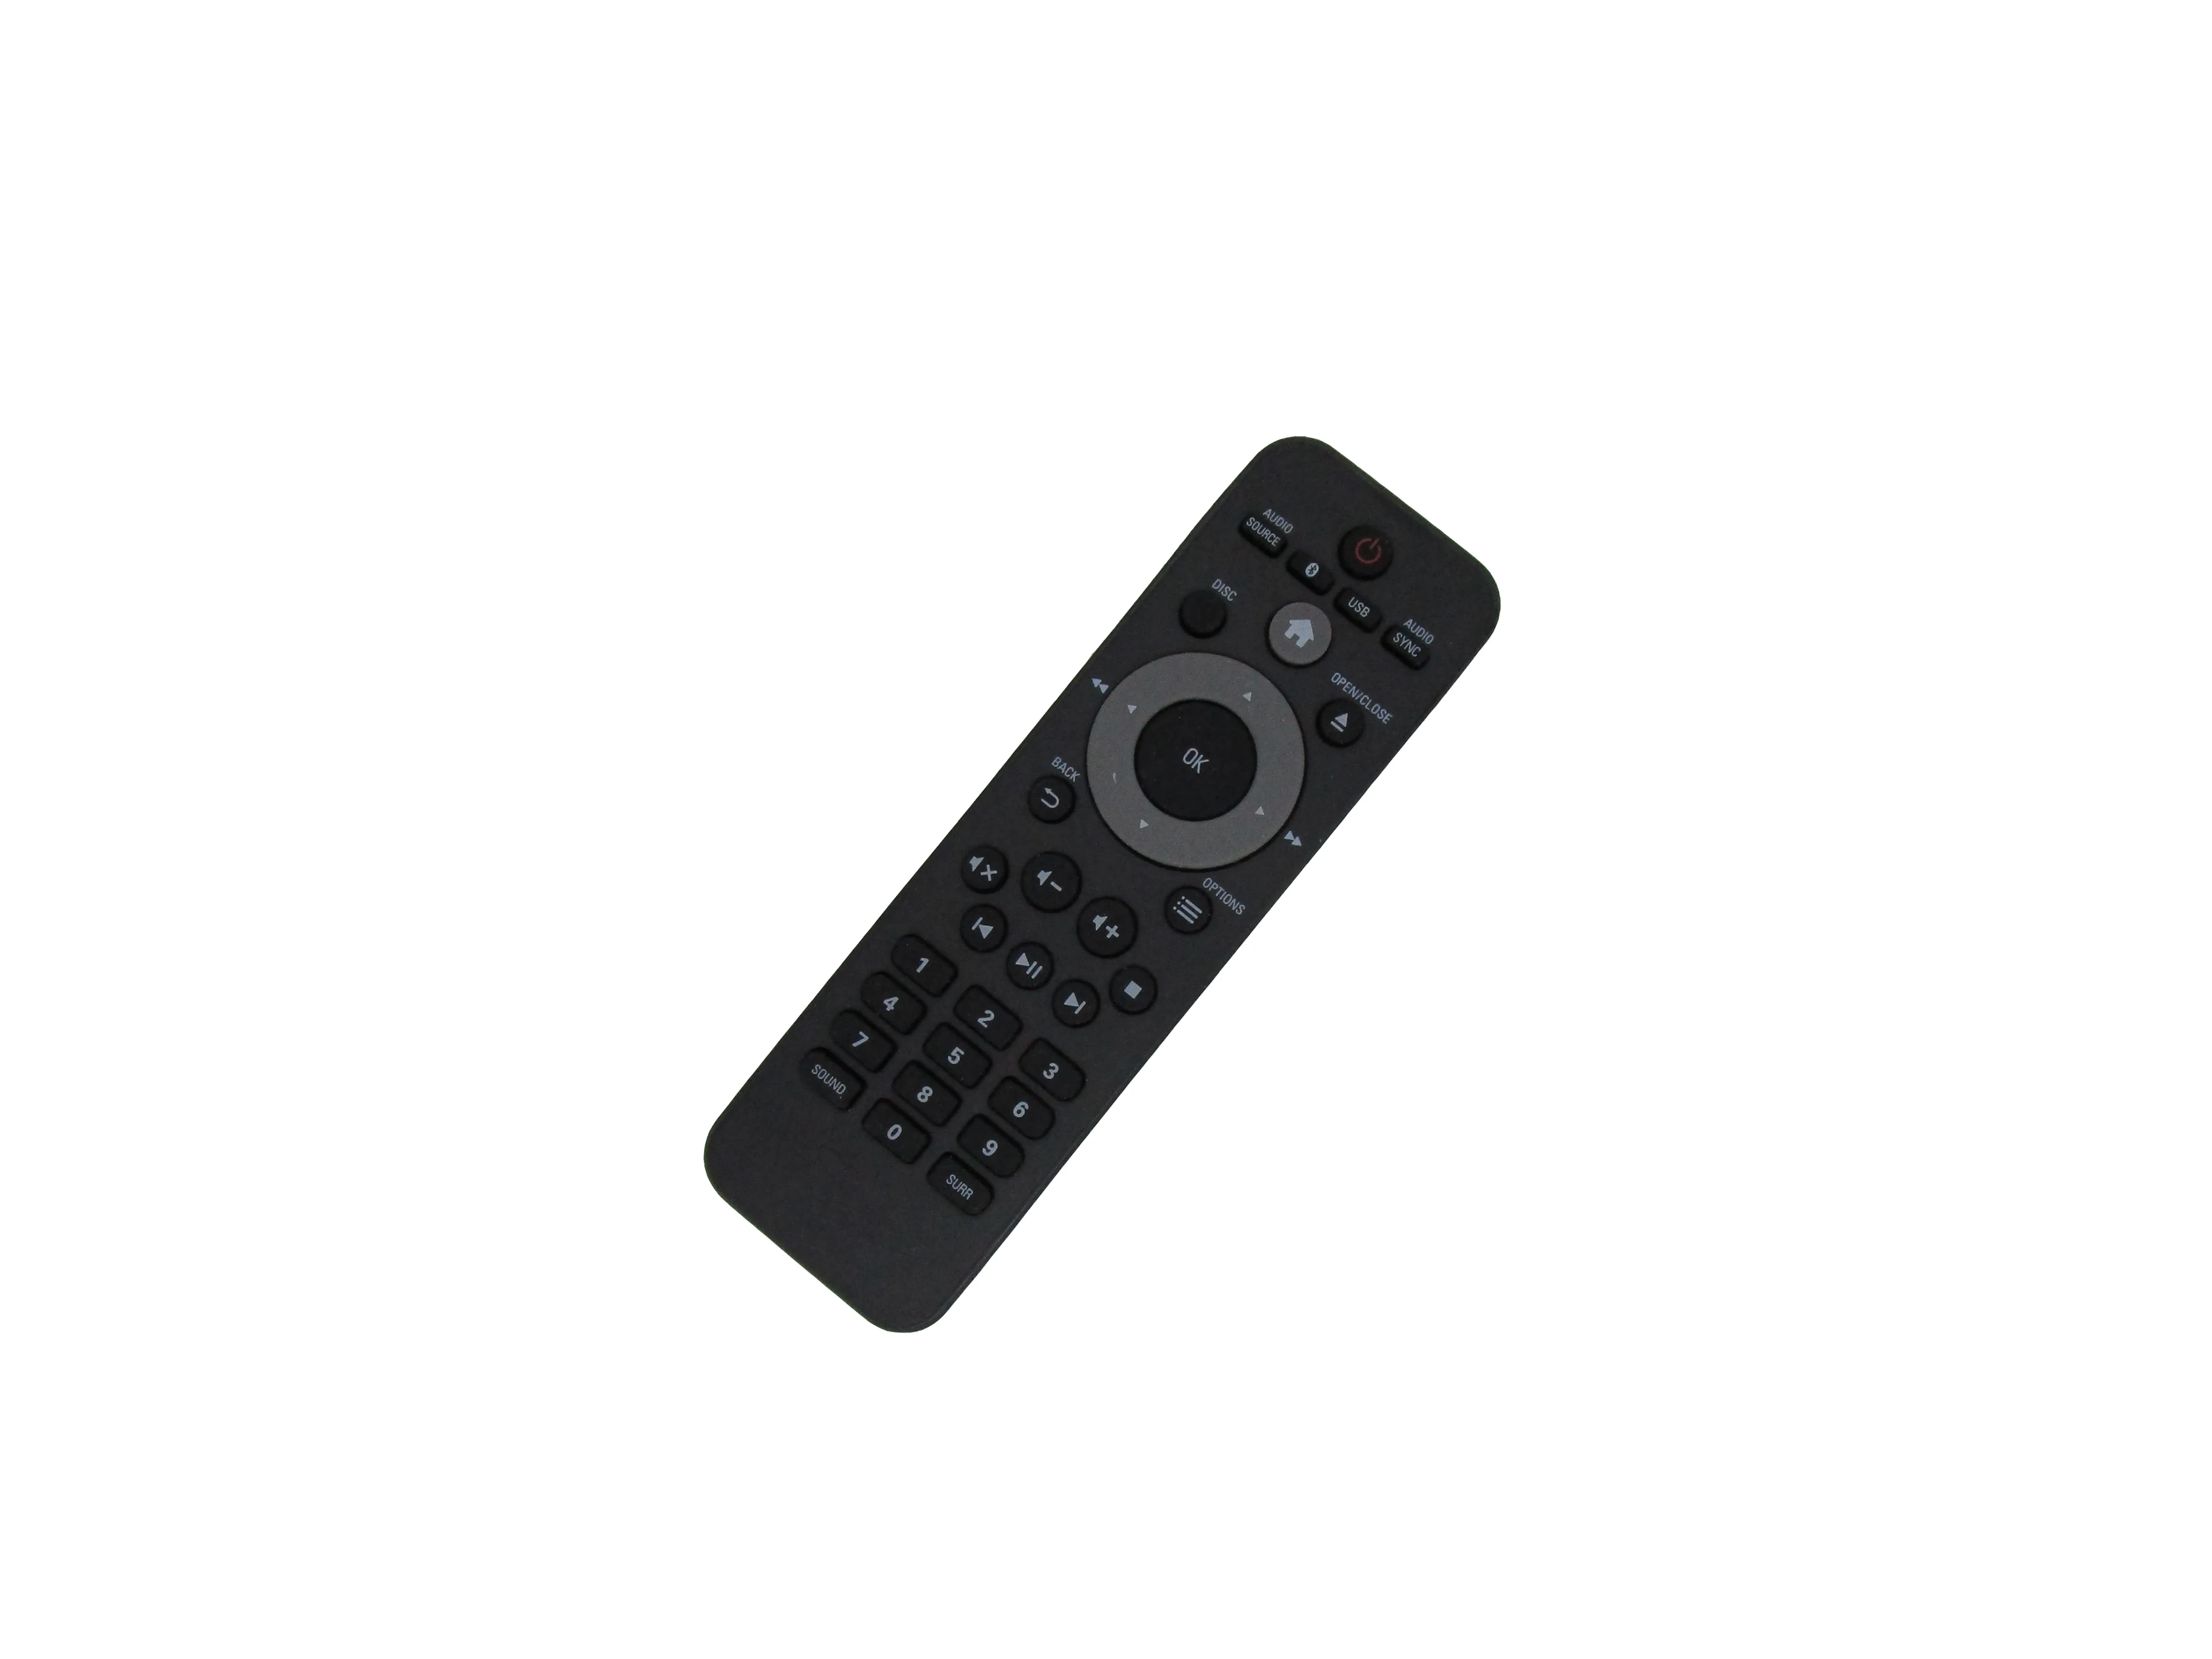 

Remote For Philips HTD3514/F7 HTD3510 HTD3570 HTD3570/98 HTD3570/51 HTD3510G/94 HTD3510/12 HTD3510/93 HTD3510/98 HTD3514/F8 Syst